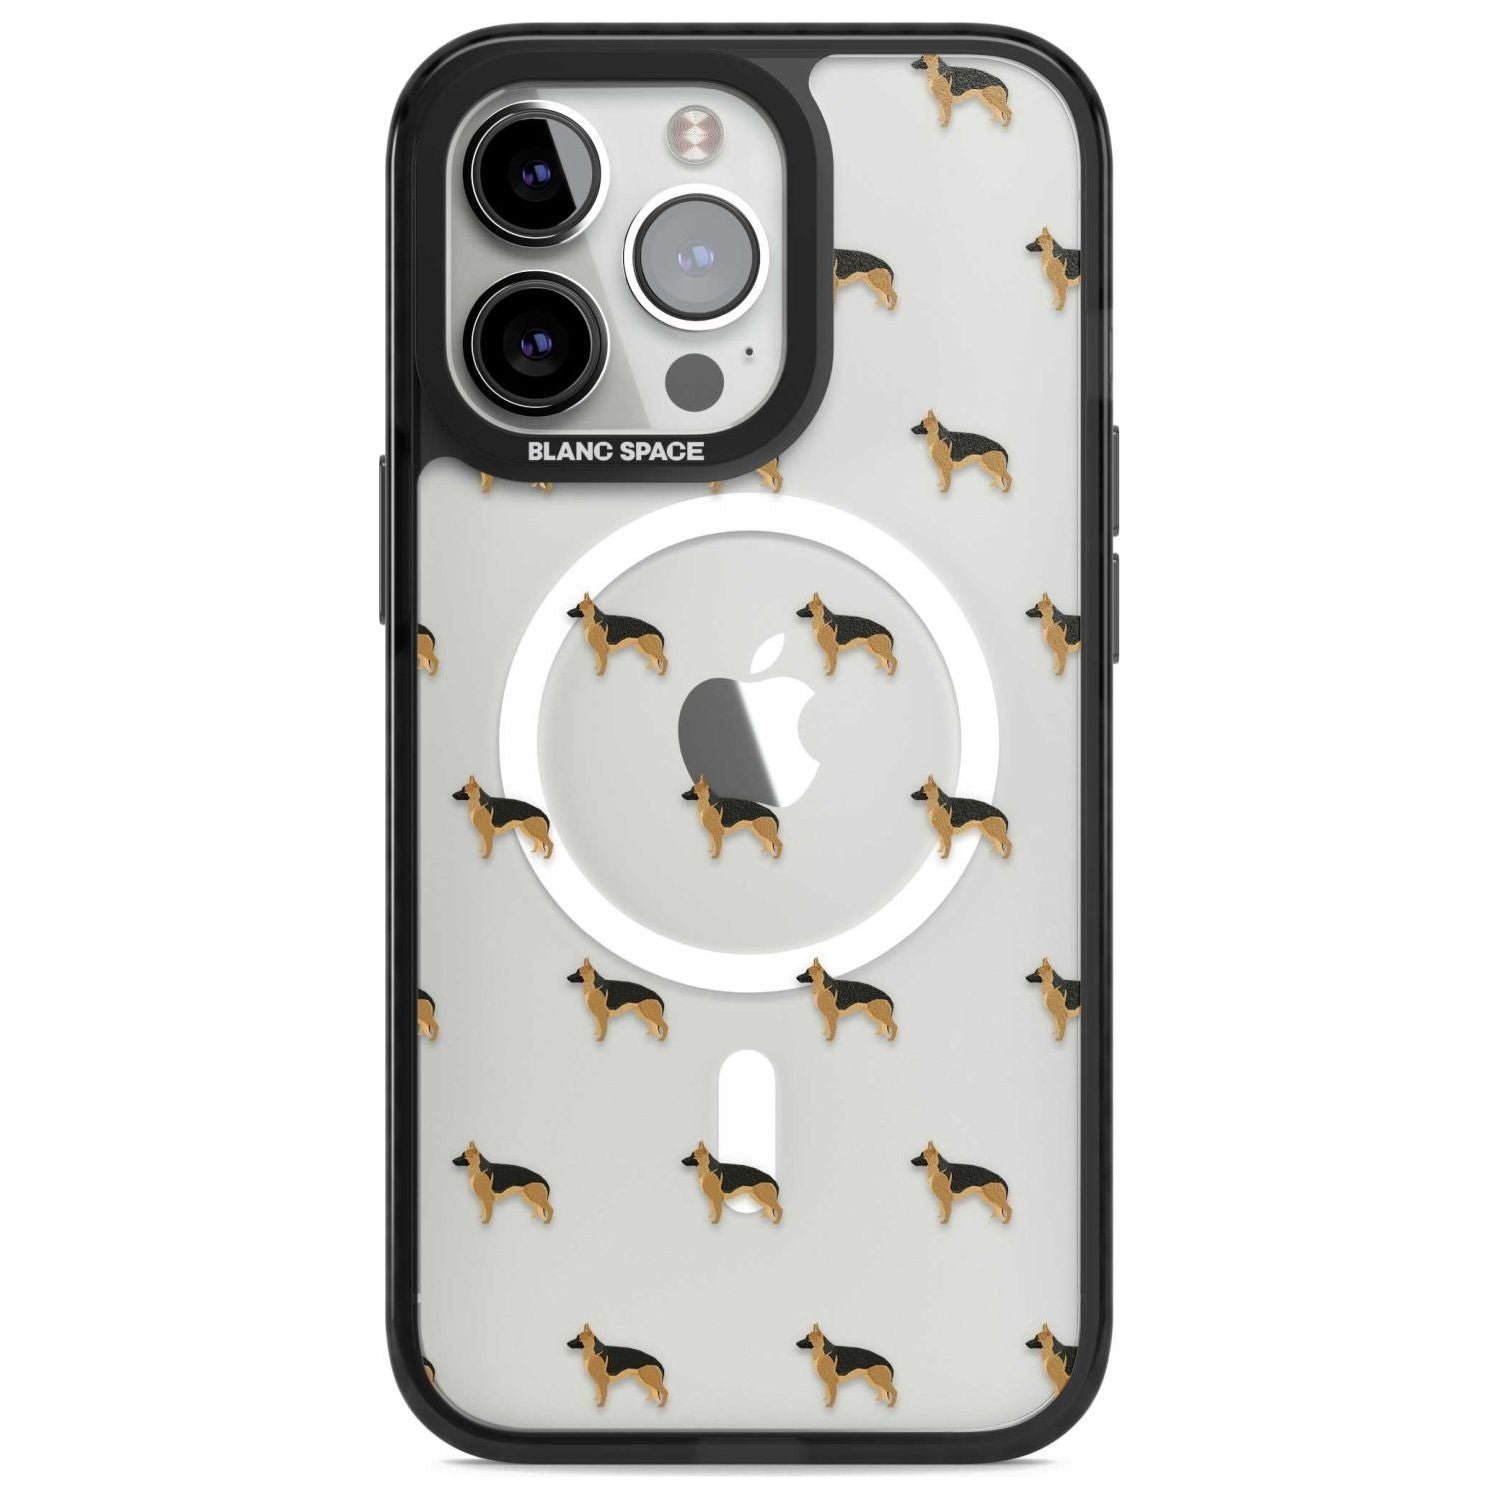 German Sherpard Dog Pattern Clear Phone Case iPhone 15 Pro Max / Magsafe Black Impact Case,iPhone 15 Pro / Magsafe Black Impact Case,iPhone 14 Pro Max / Magsafe Black Impact Case,iPhone 14 Pro / Magsafe Black Impact Case,iPhone 13 Pro / Magsafe Black Impact Case Blanc Space